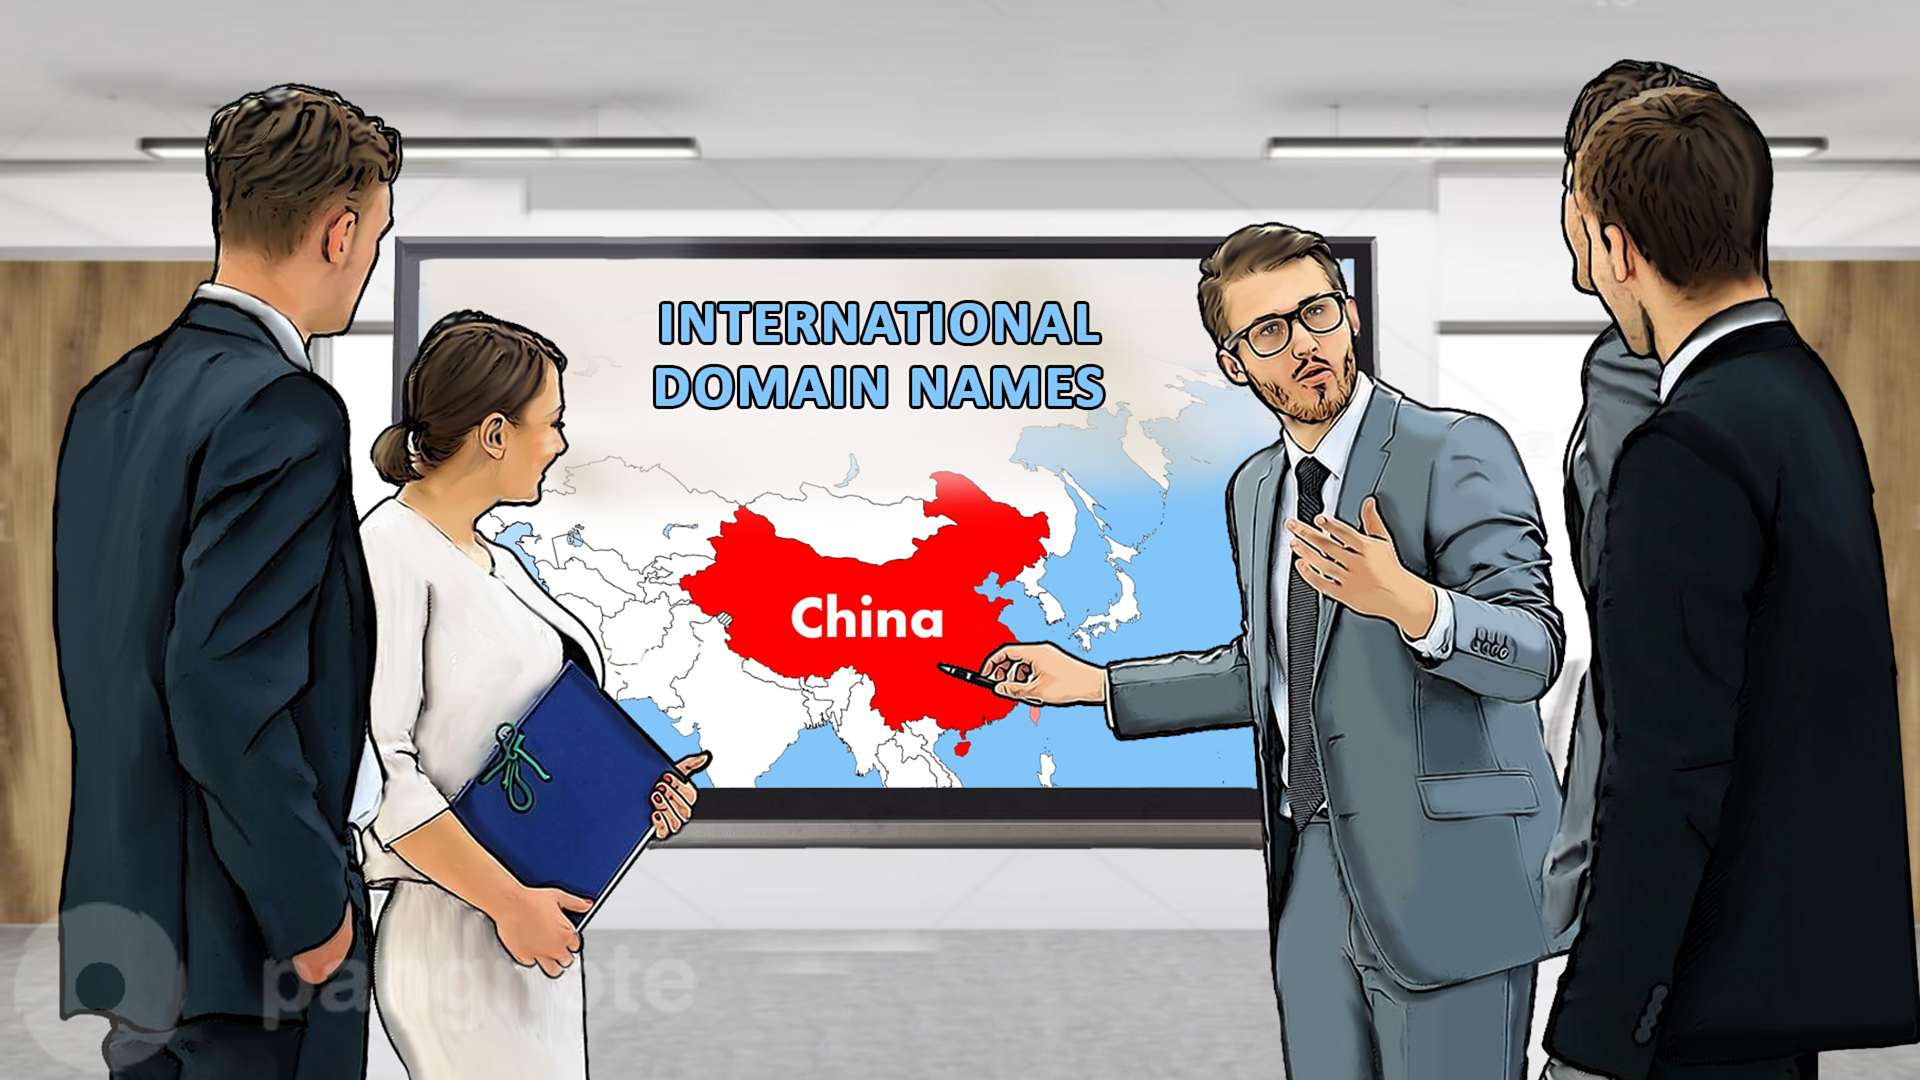 ICANN works to recognizing internationalized names in China process